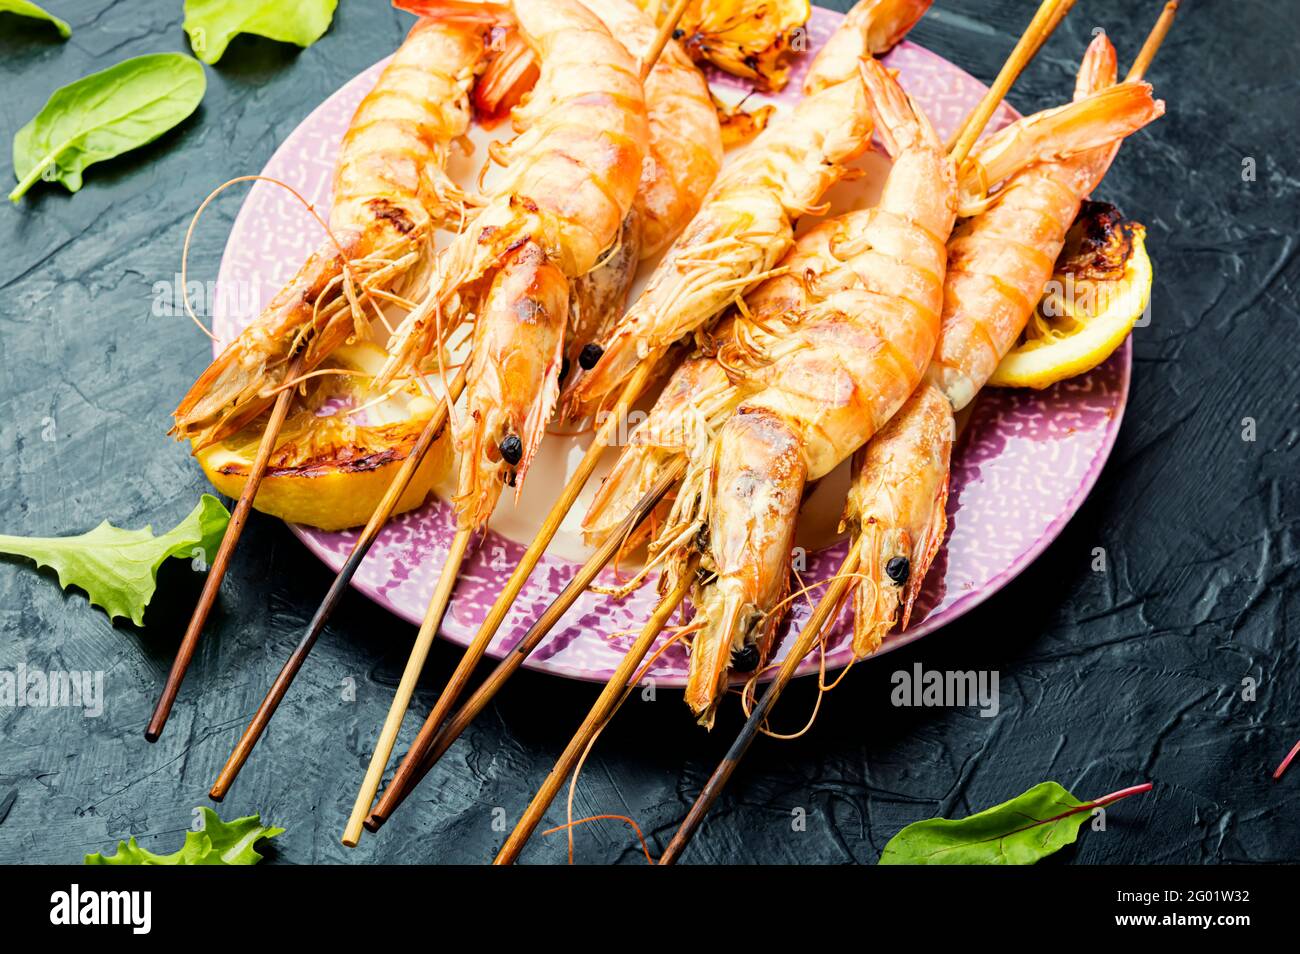 Grilled langoustines,prawn roasted on a skewer Stock Photo